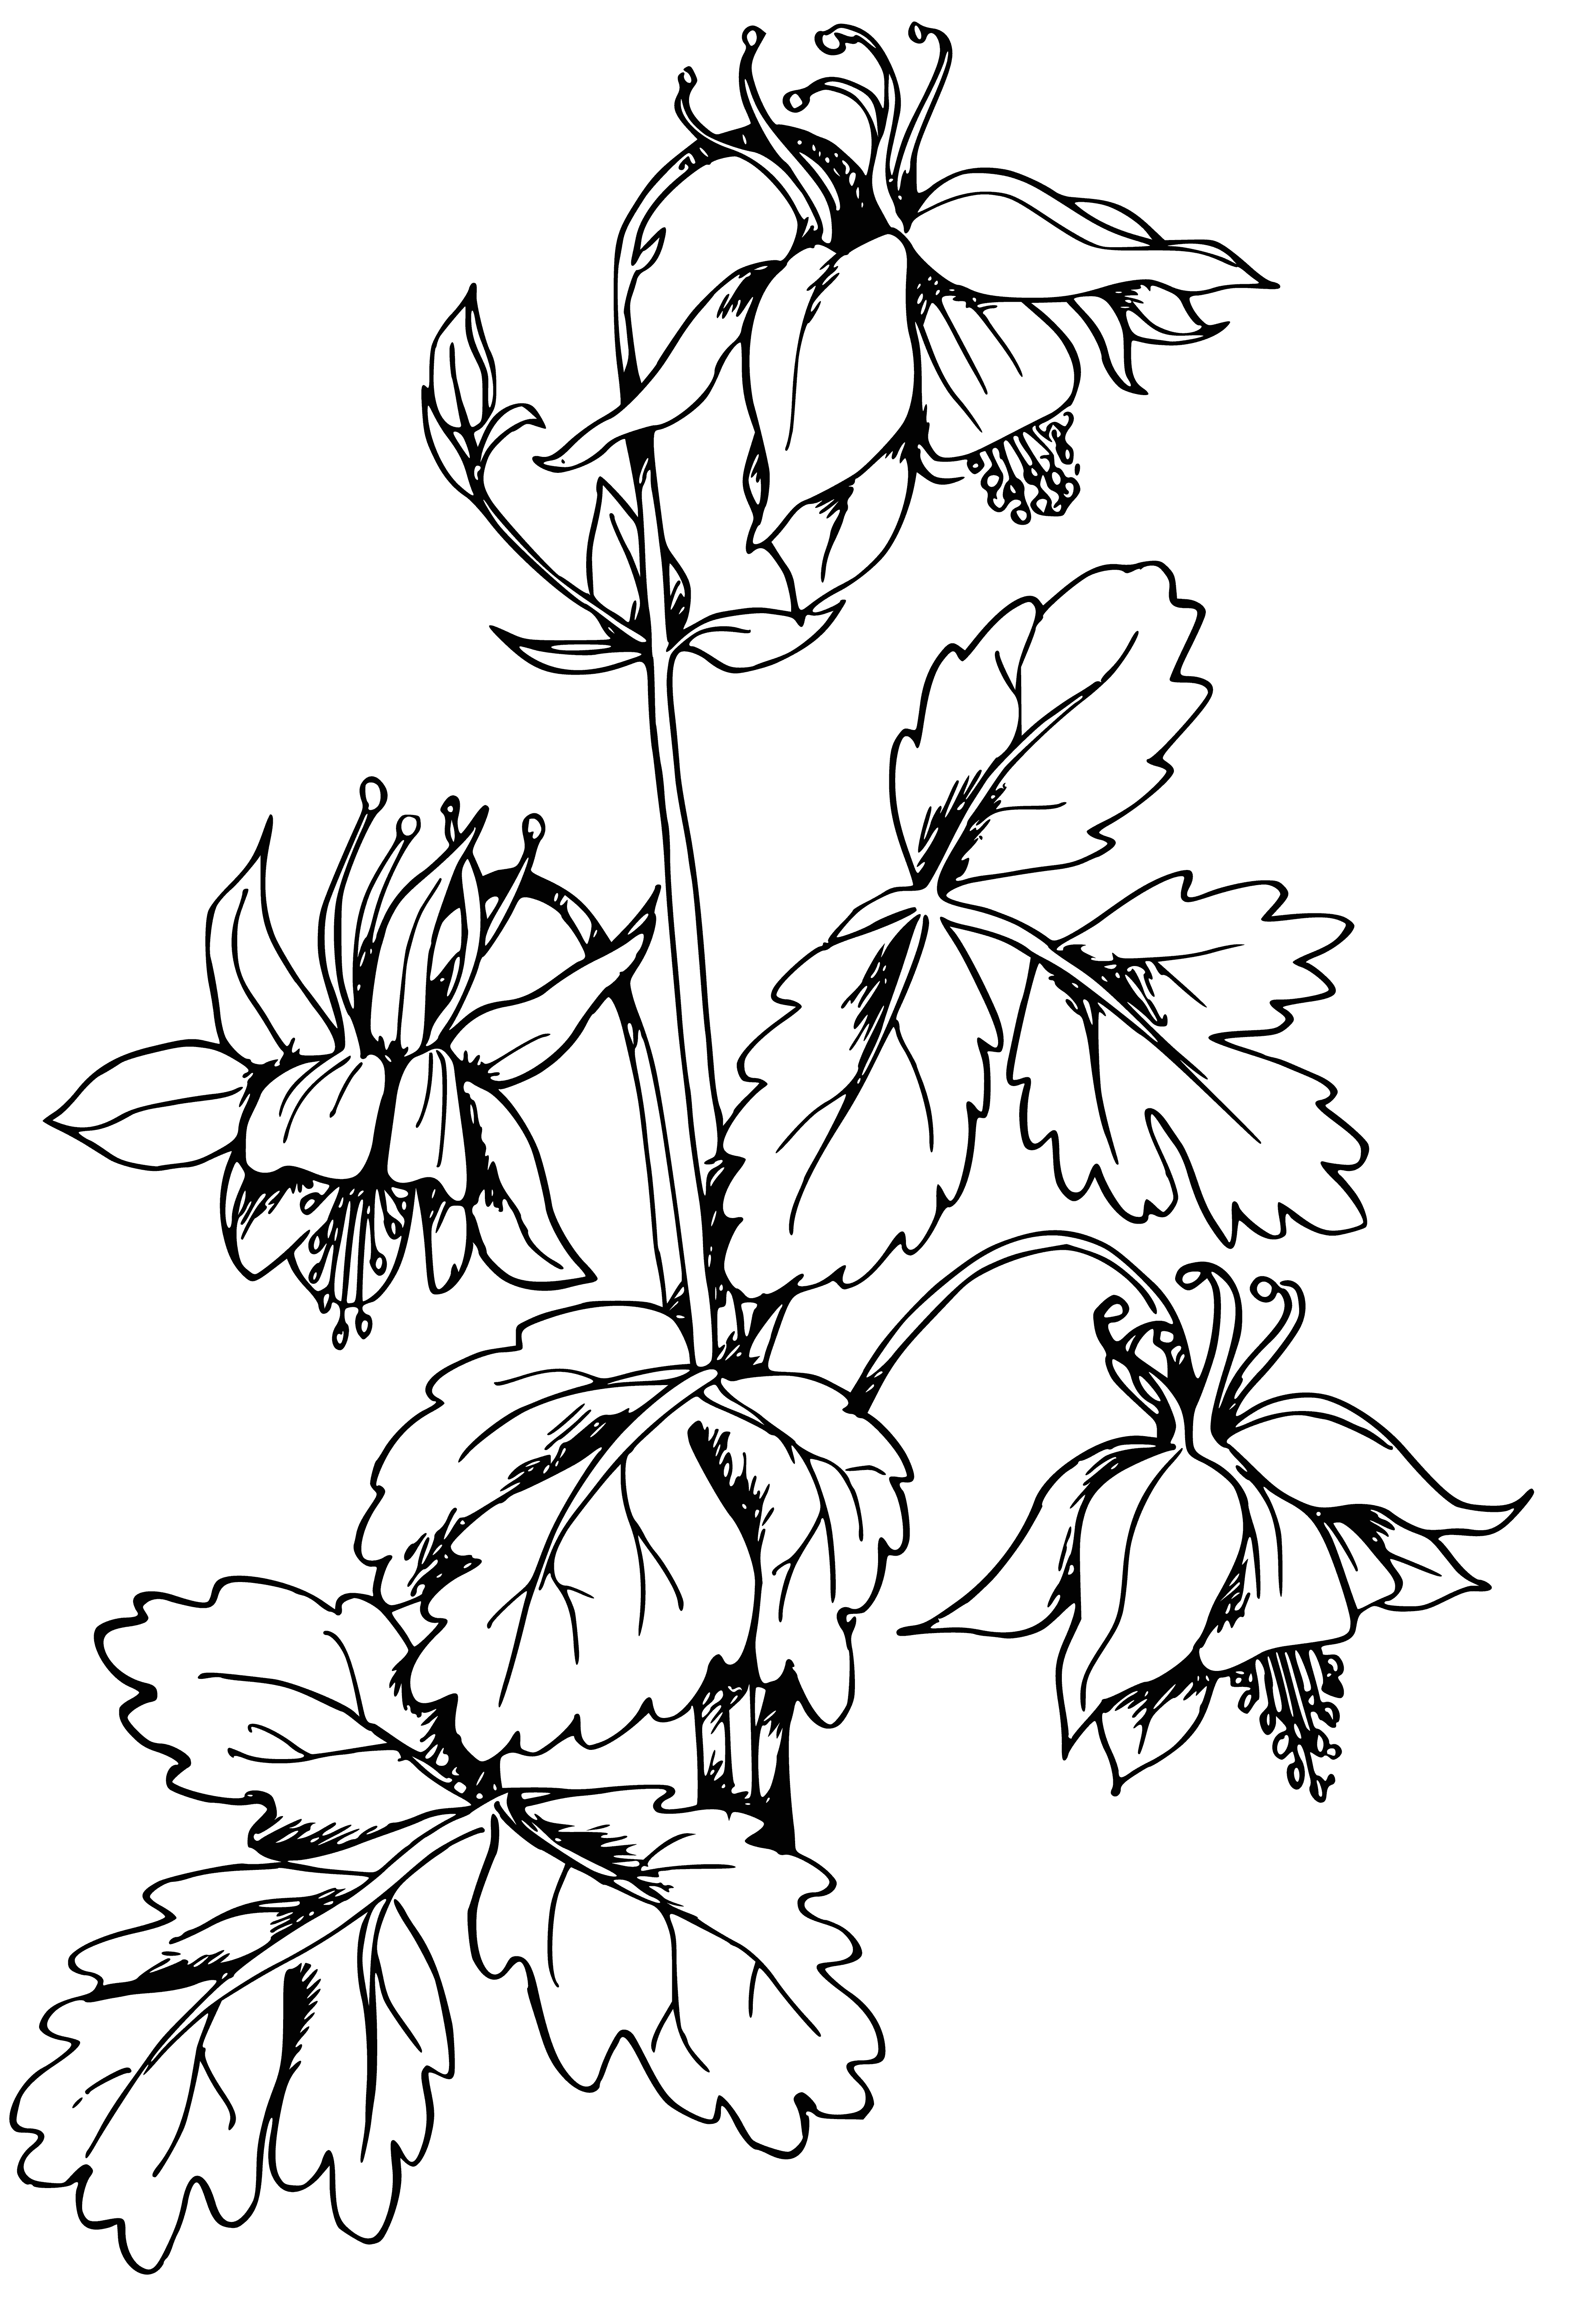 coloring page: #FuchsiaLove